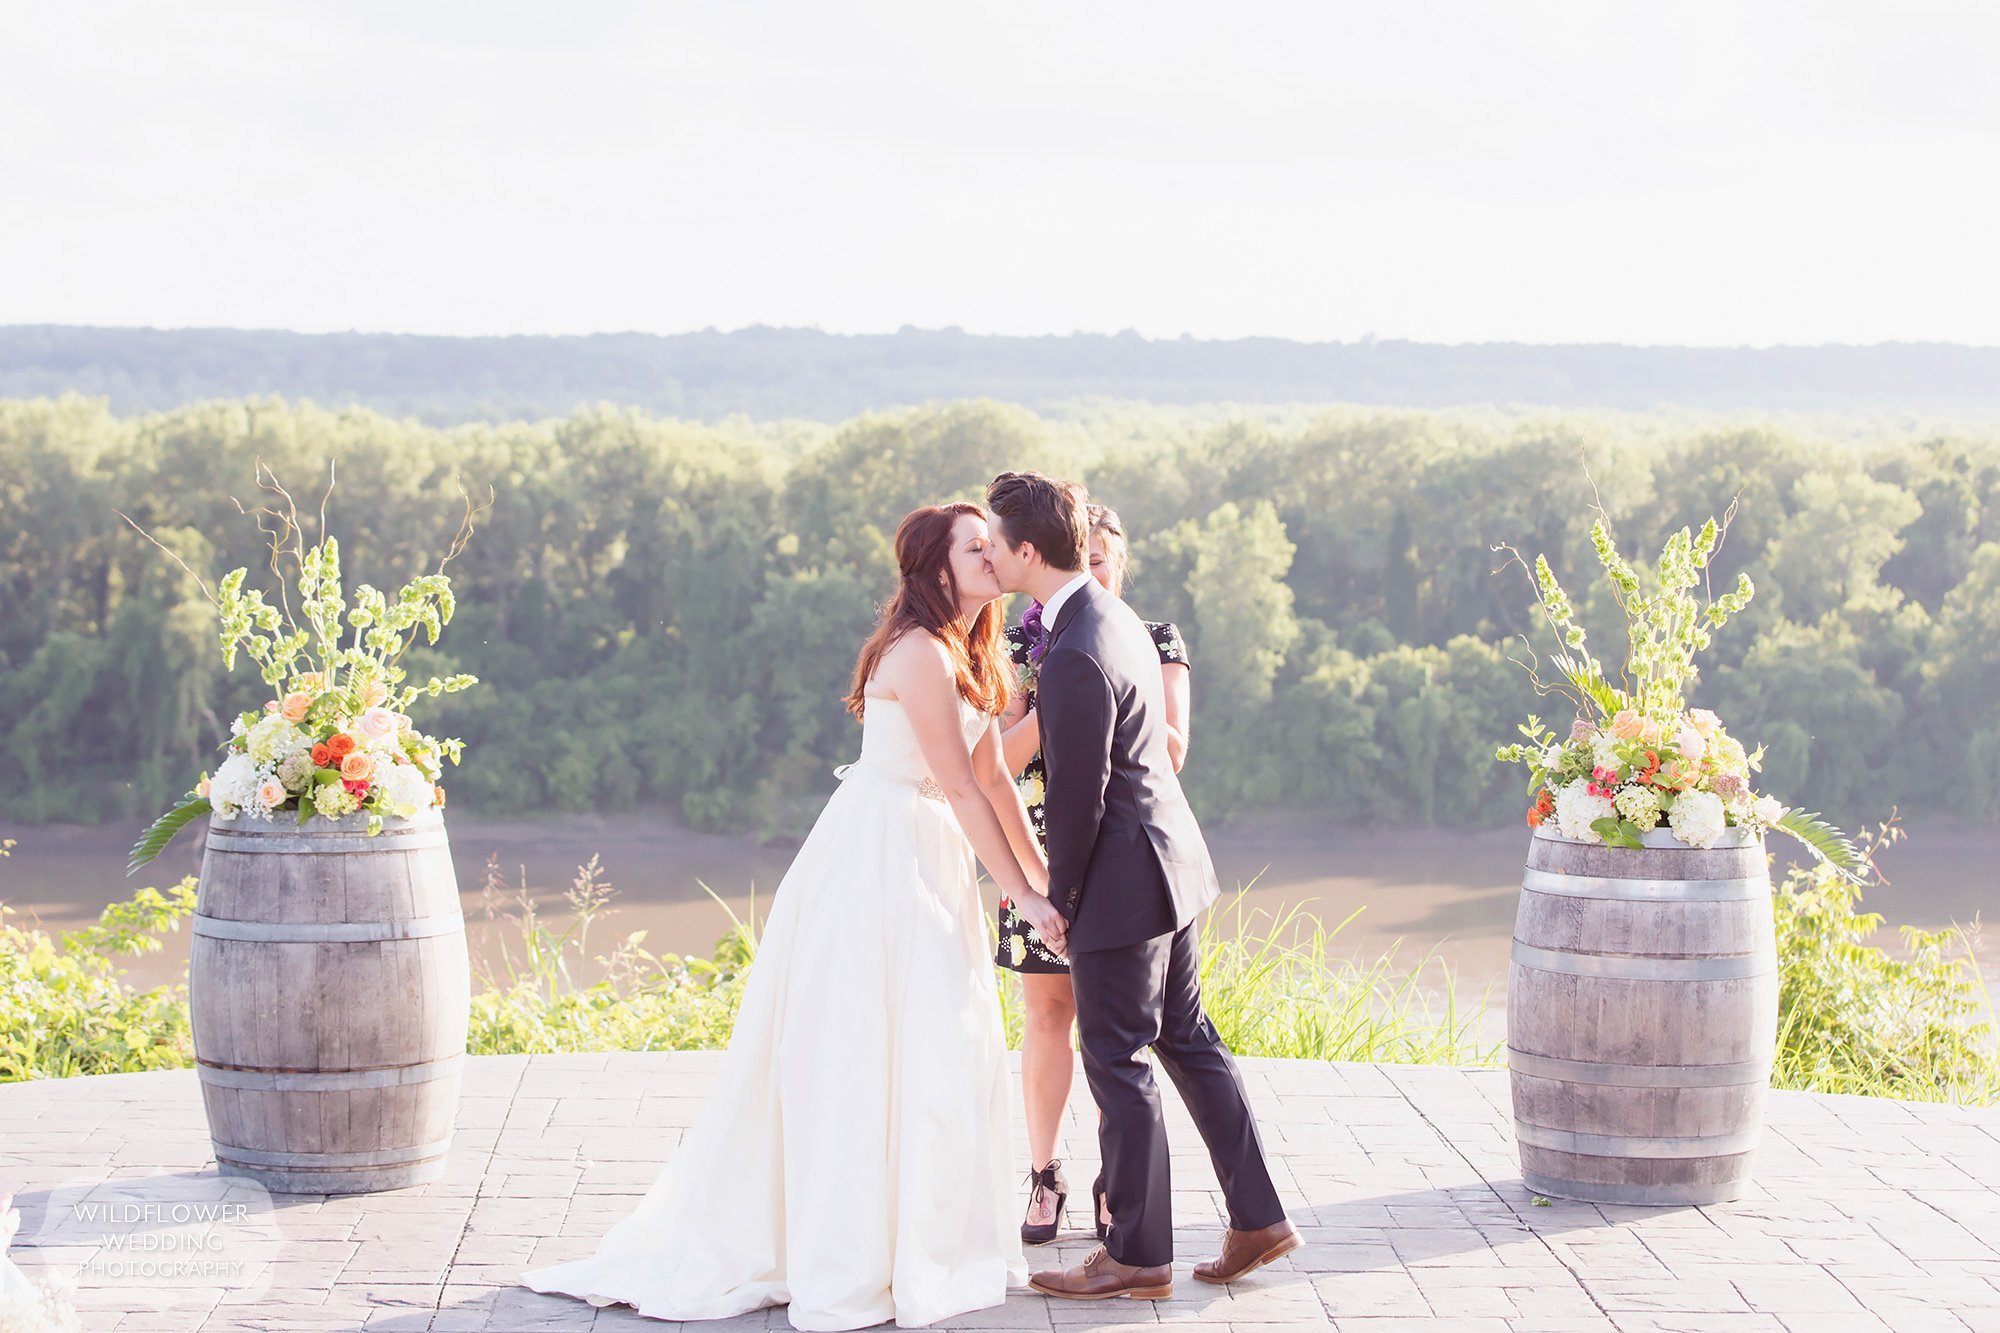 The bride and groom kiss during their outdoor wedding ceremony at the Les Bourgeois Winery in Rocheport, MO.